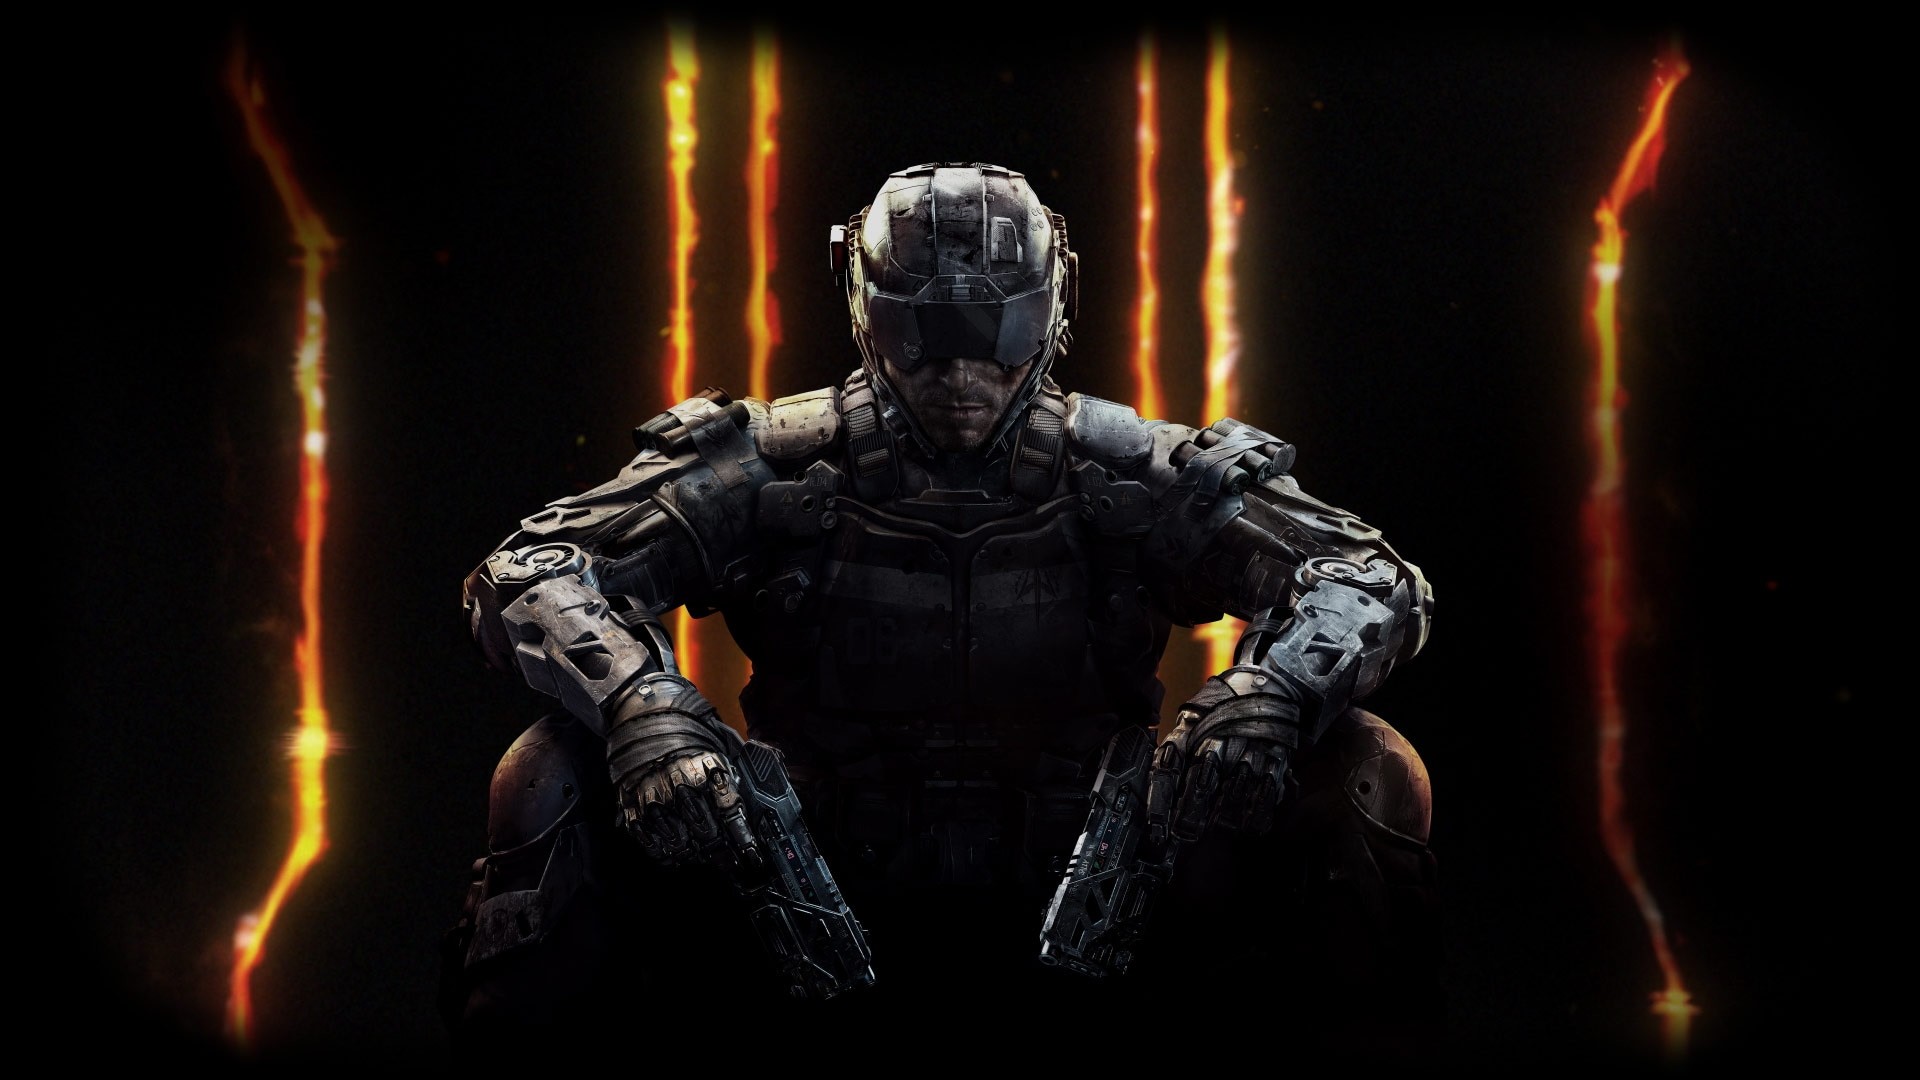 1920x1080 Video Game - Call of Duty: Black Ops III Call Of Duty Wallpaper